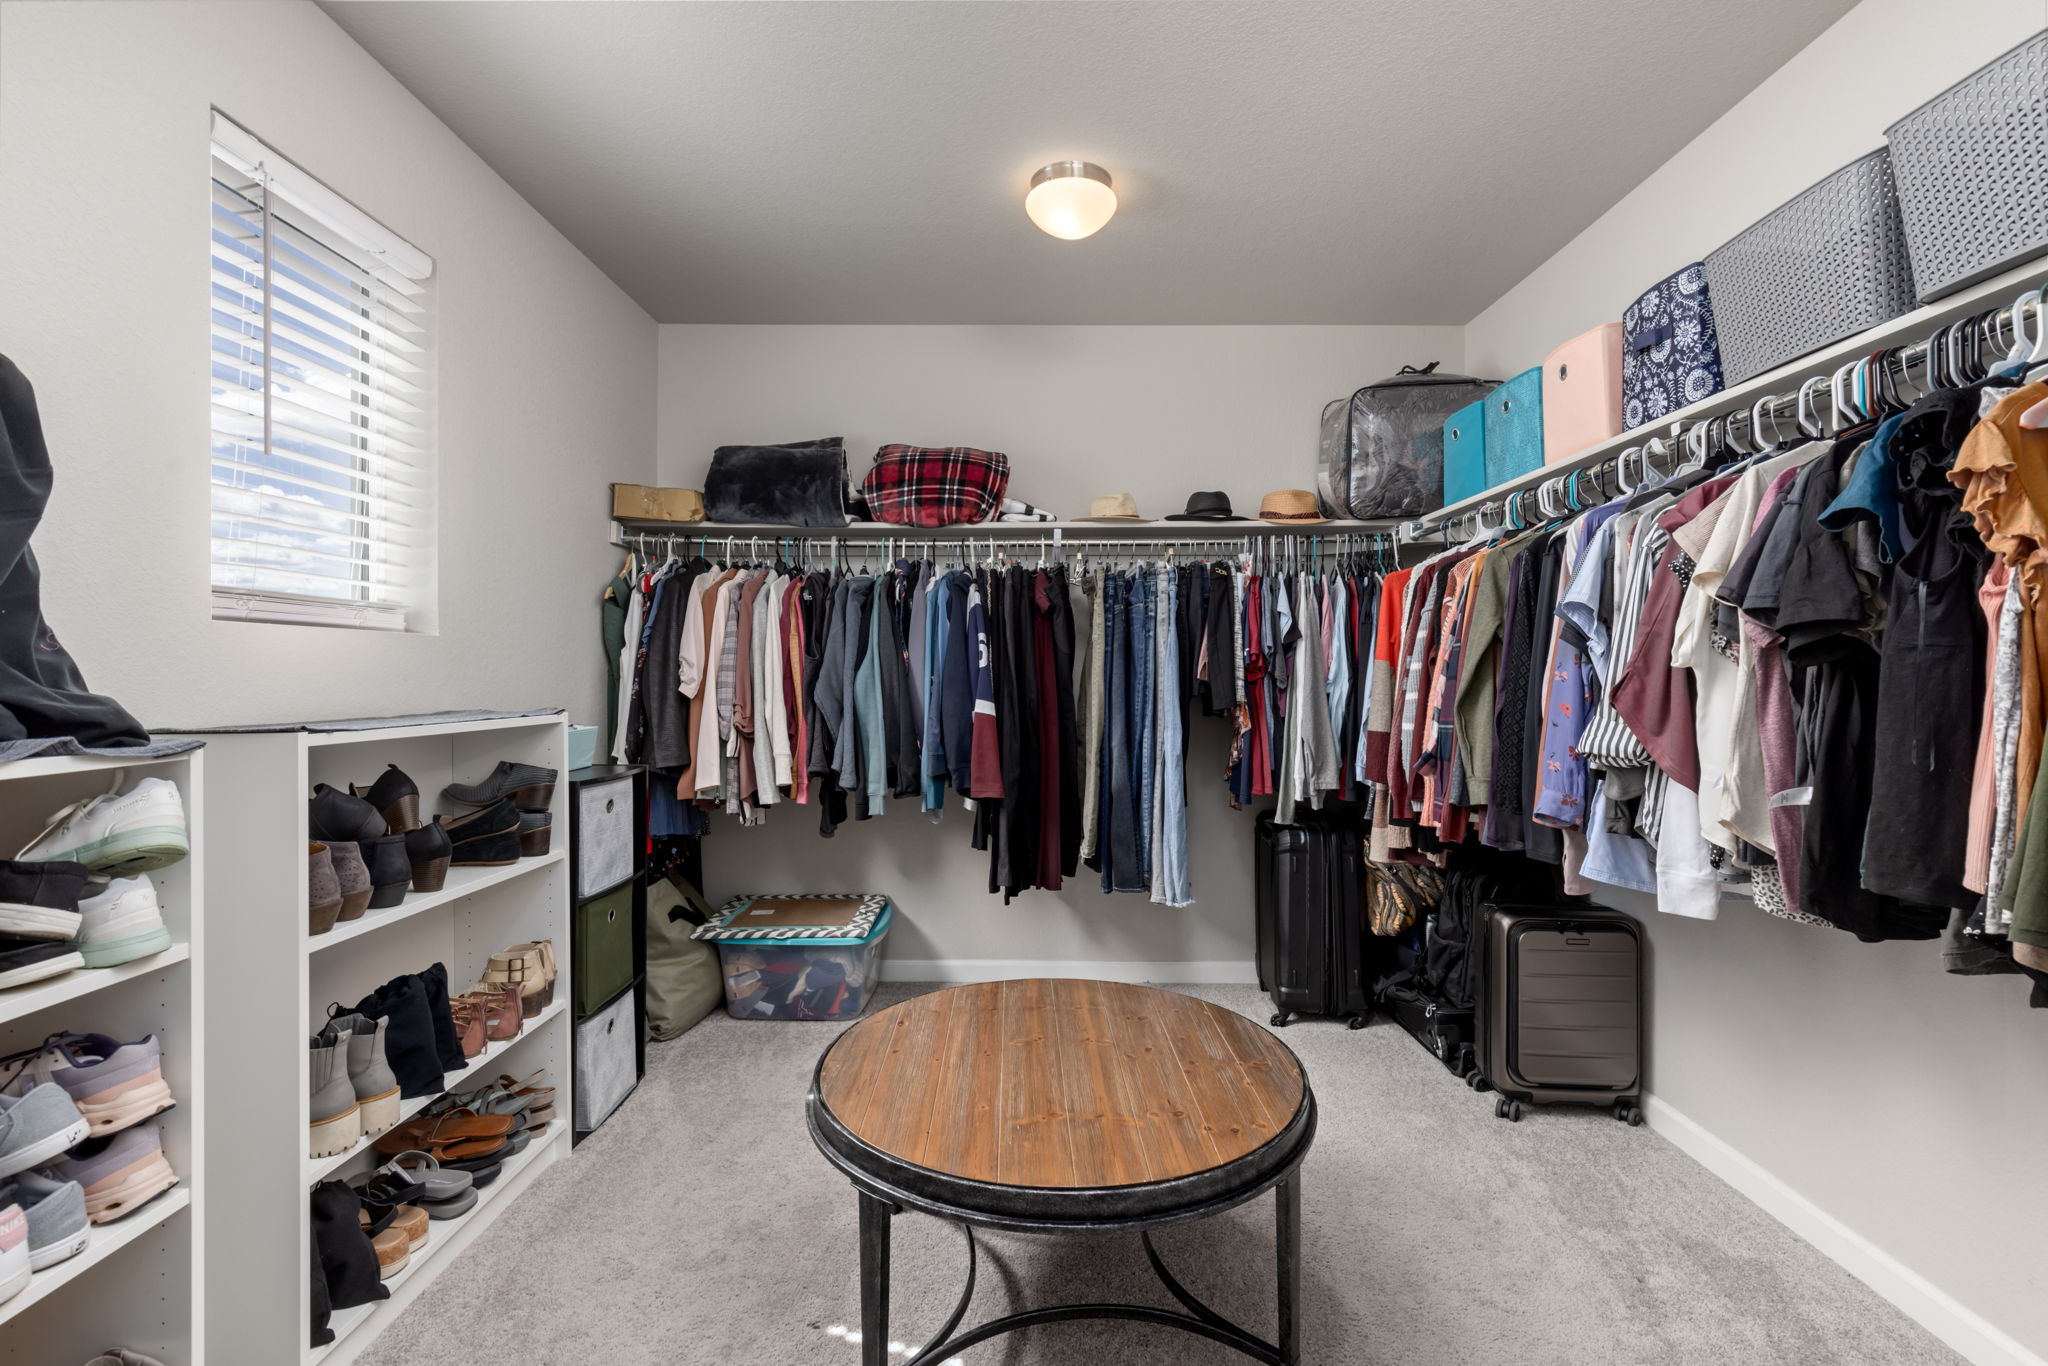 Large (10ft x 11ft) walk-in closet off primary suite